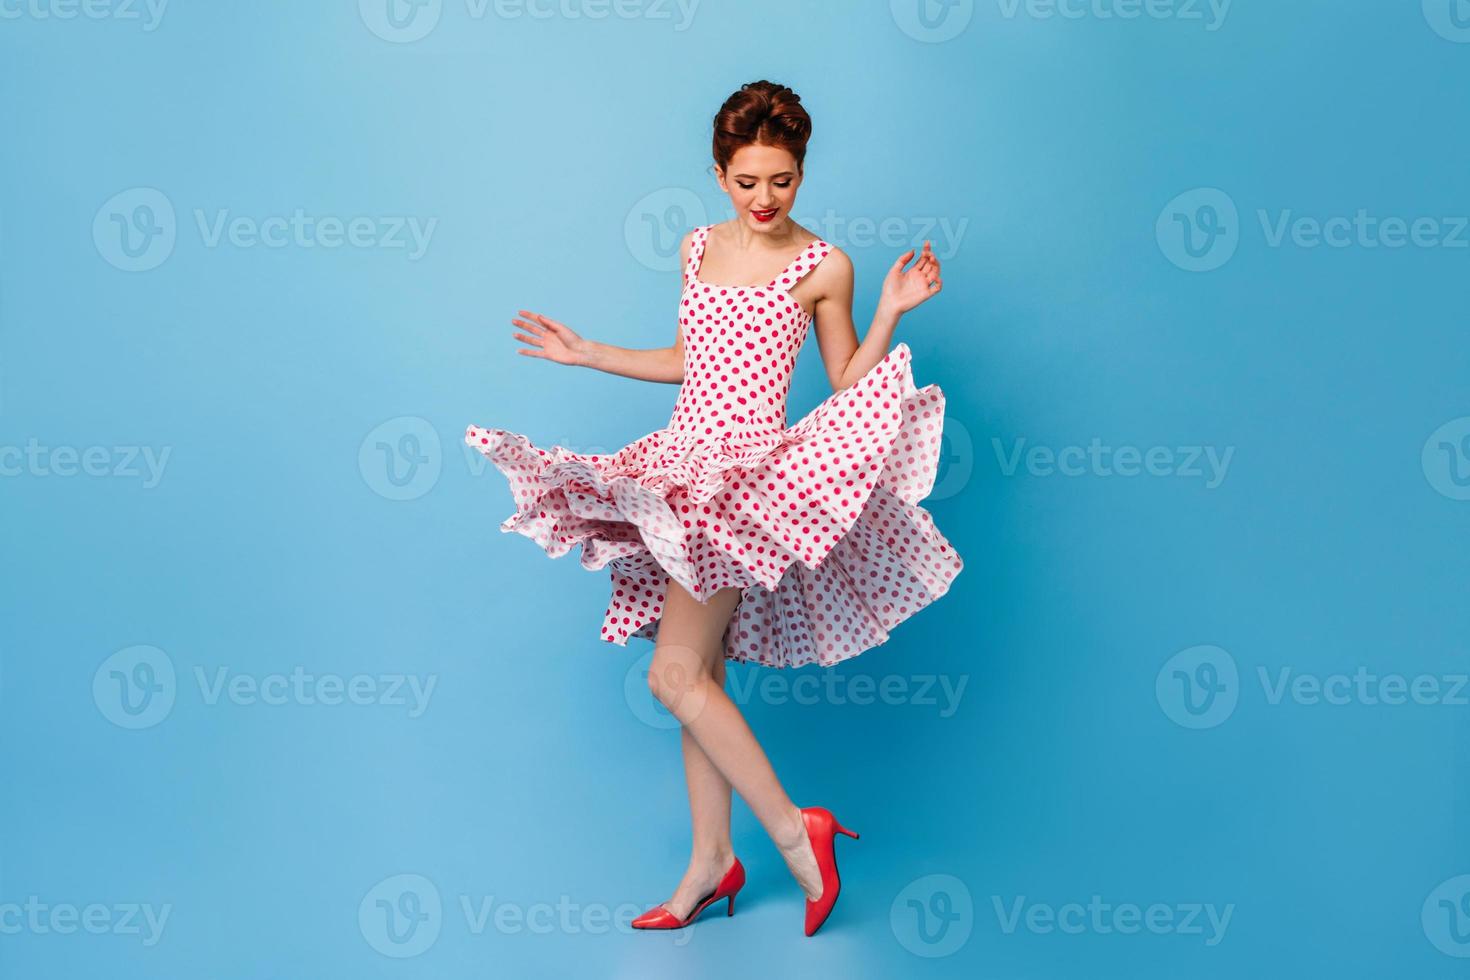 https://static.vecteezy.com/system/resources/previews/012/915/293/non_2x/full-length-view-of-glad-woman-dancing-on-blue-background-pinup-girl-in-polka-dot-dress-having-fun-photo.jpg